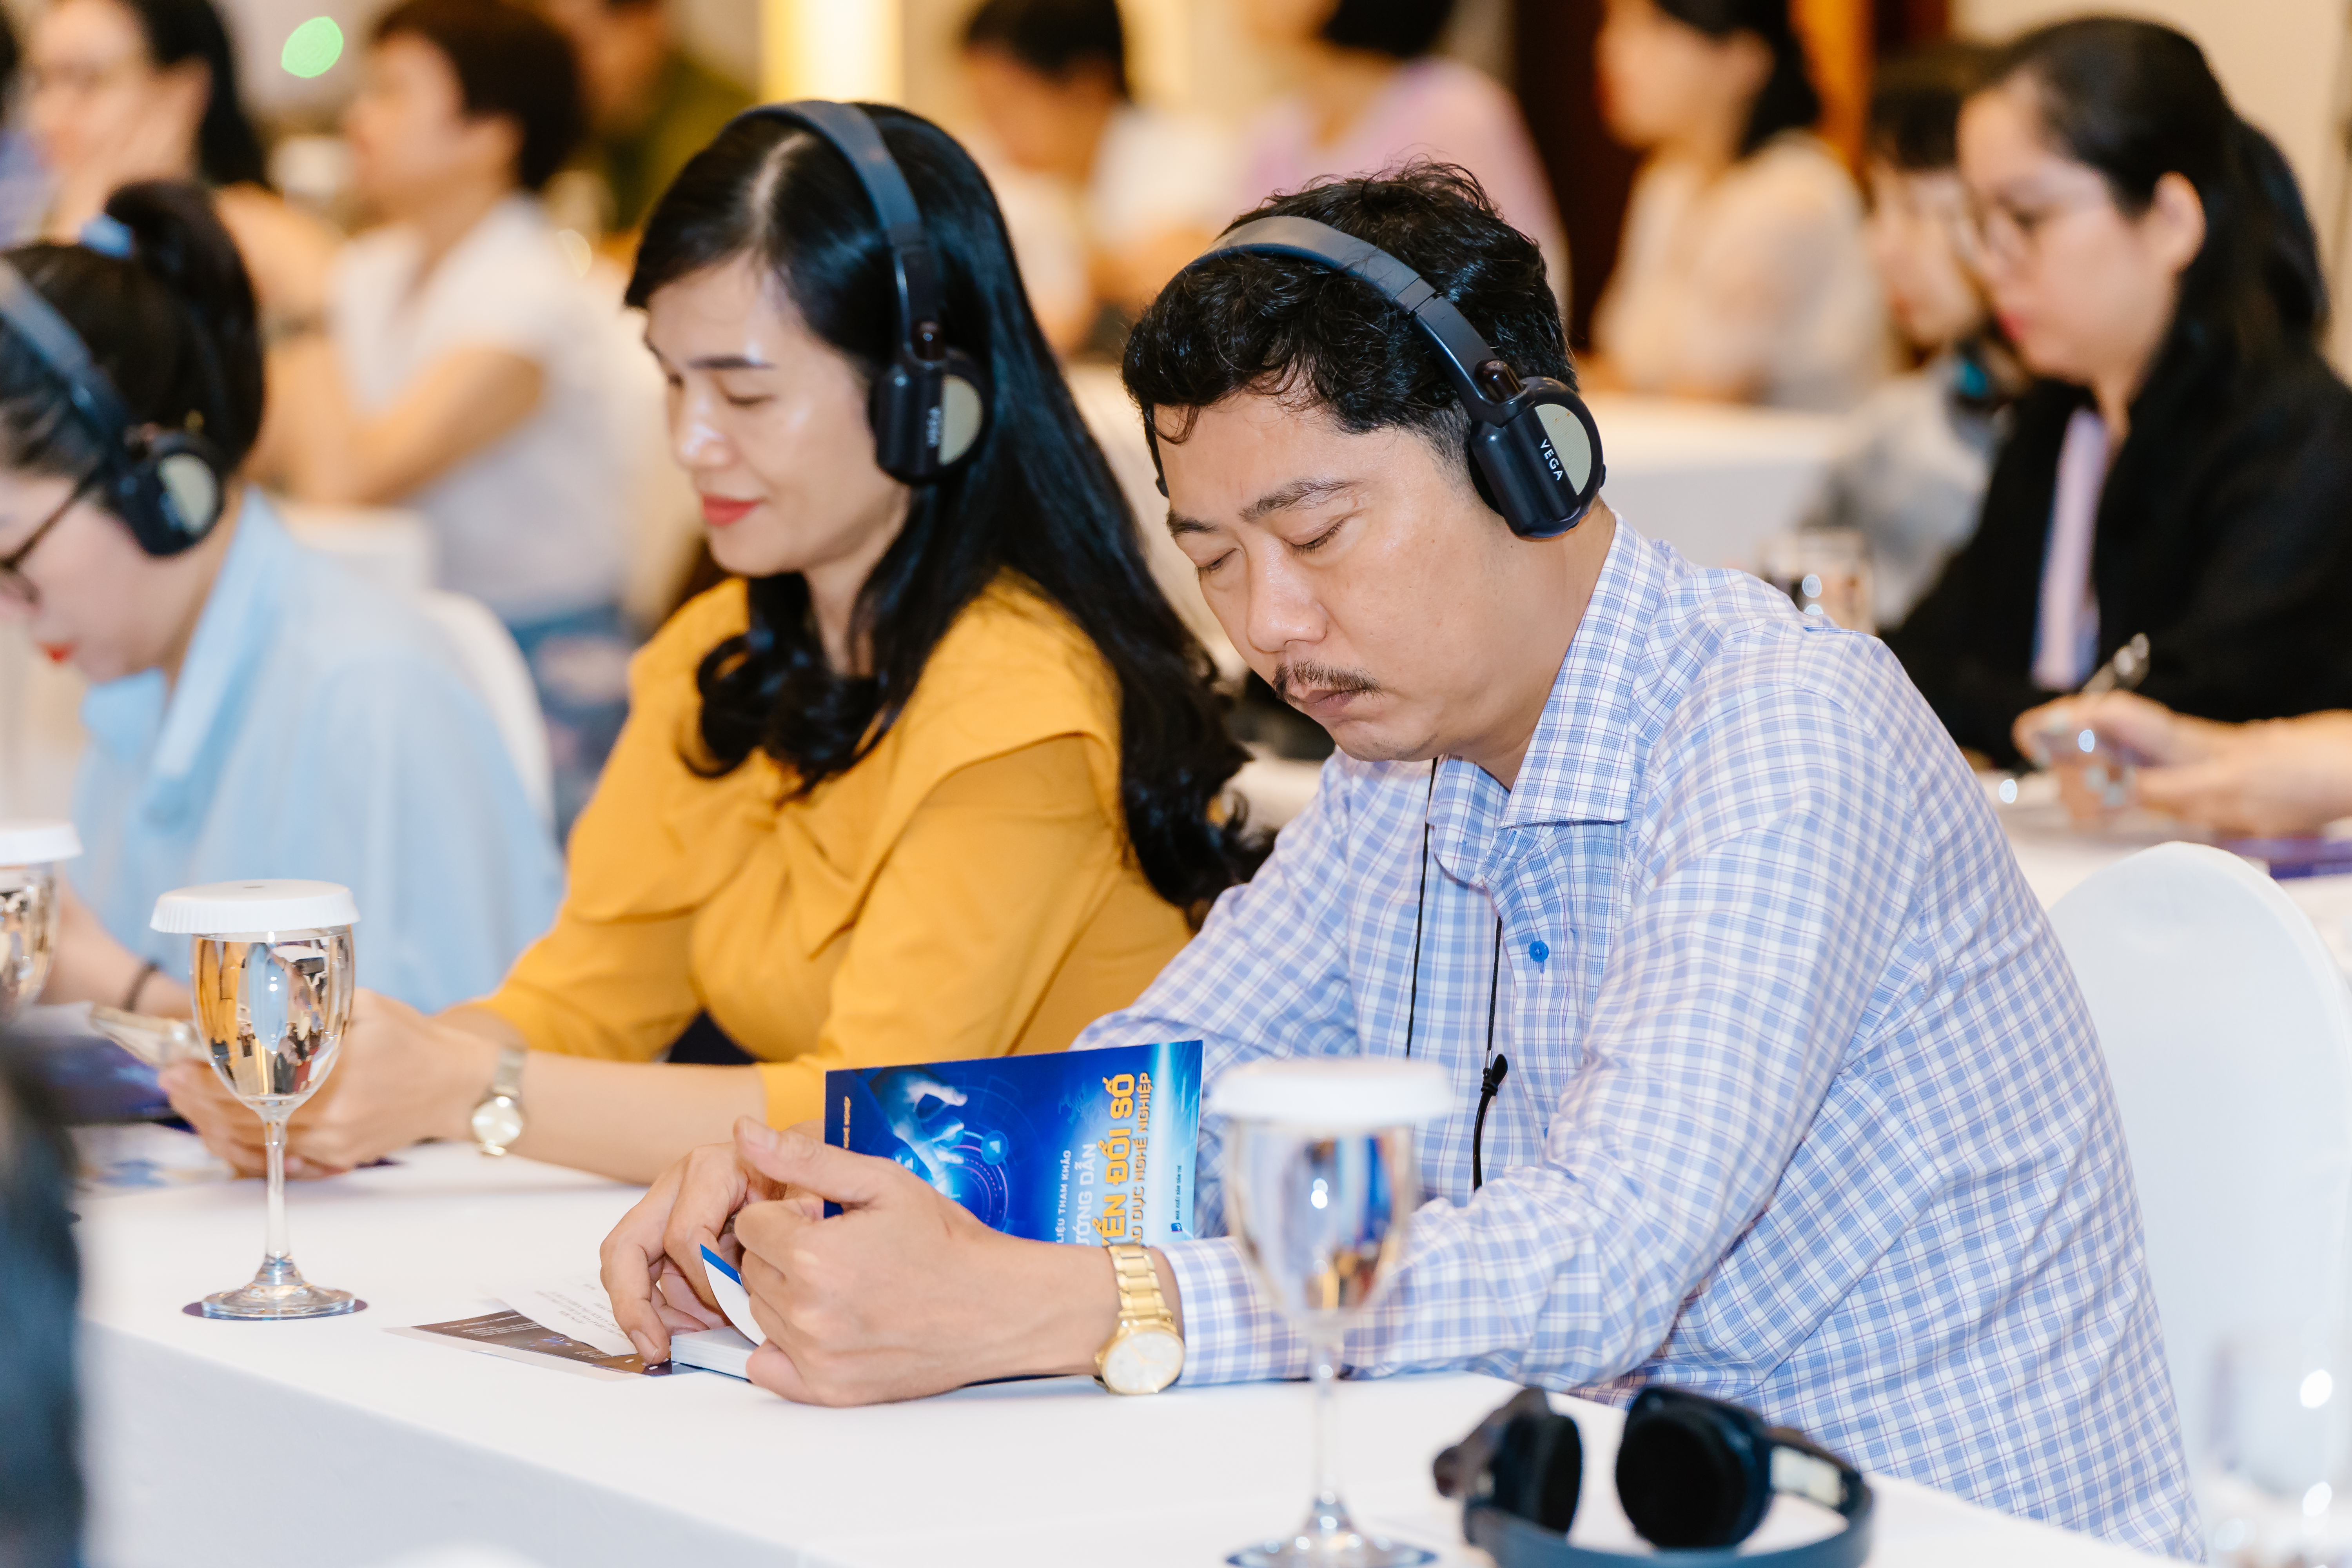 The workshop is attended by nearly 200 participants, both in-person and online, from the Government of Viet Nam, relevant agencies from the central and the provinces, embassies, international organizations, and NGOs.